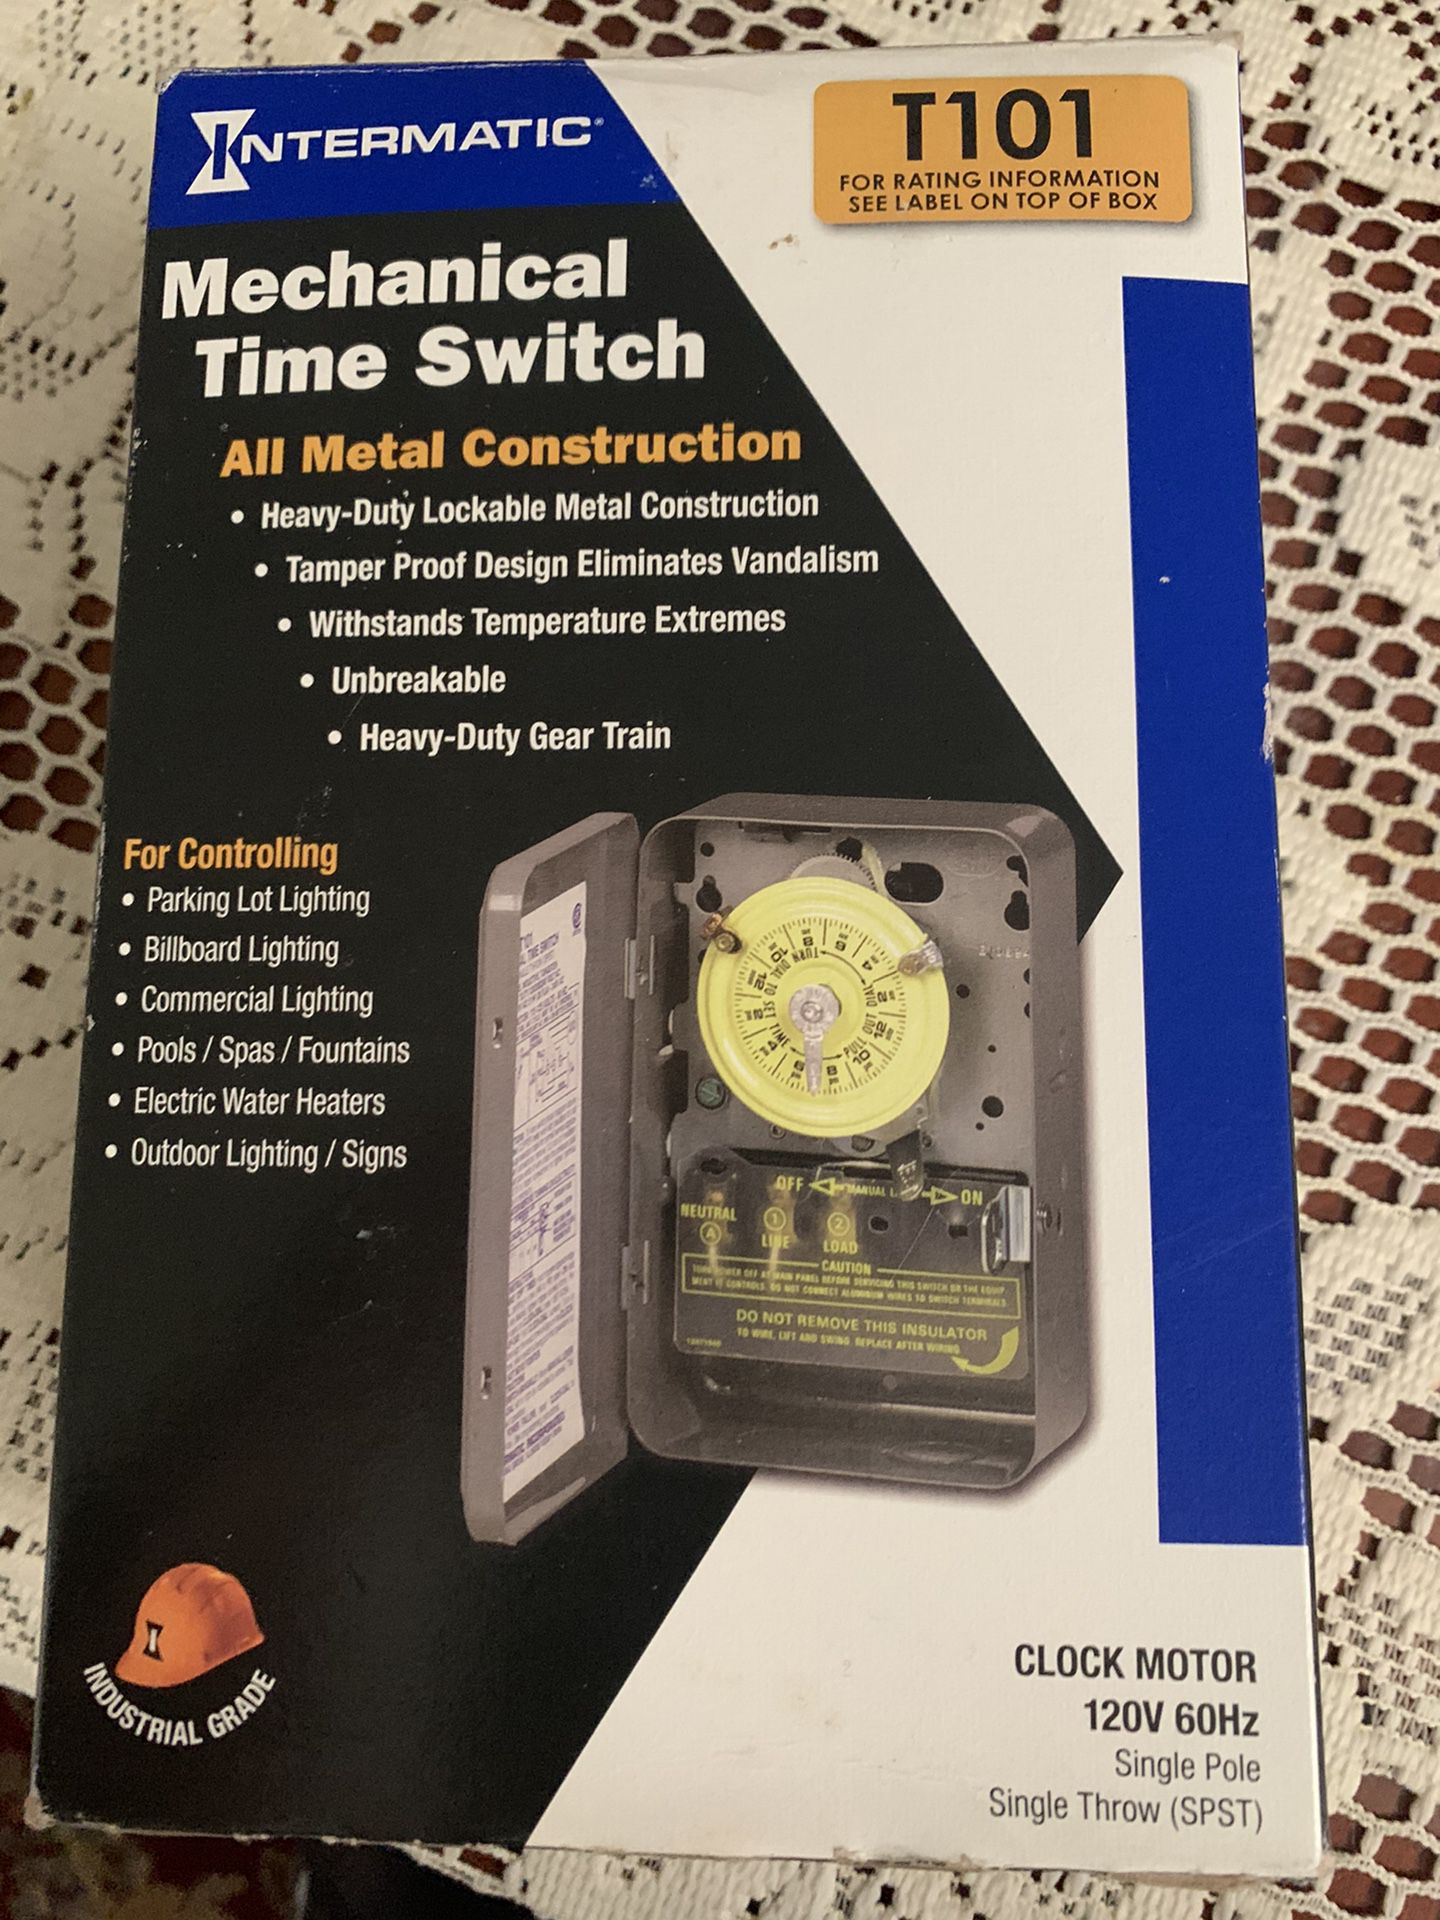 Mechanical time switch